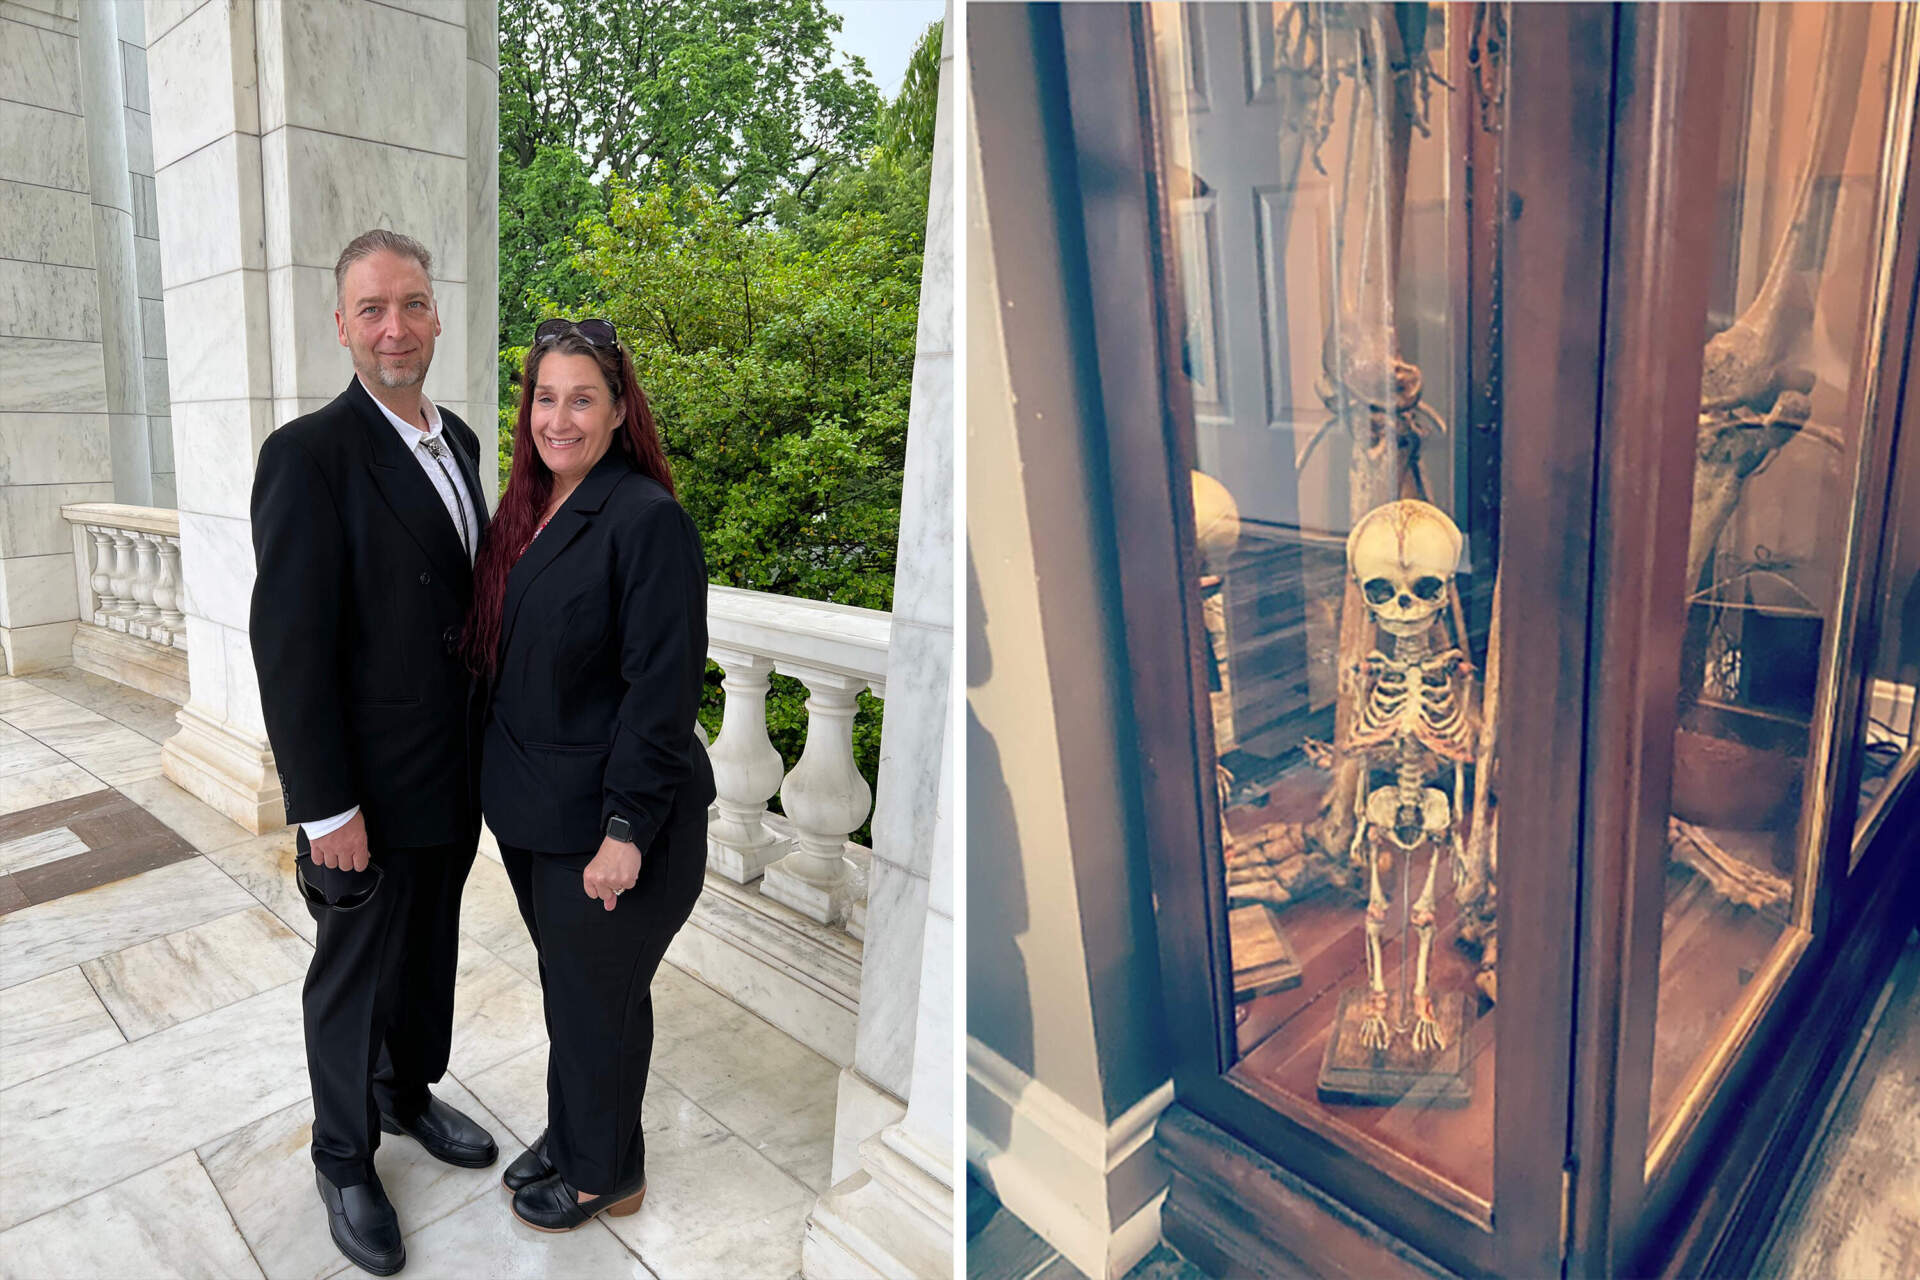 Justin Capps and Sonya Cobb have human remains, including a 36-week-old fetal skeleton as seen on the right, on display in their Delaware home. (Courtesy Justin Capps and Sonya Cobb)